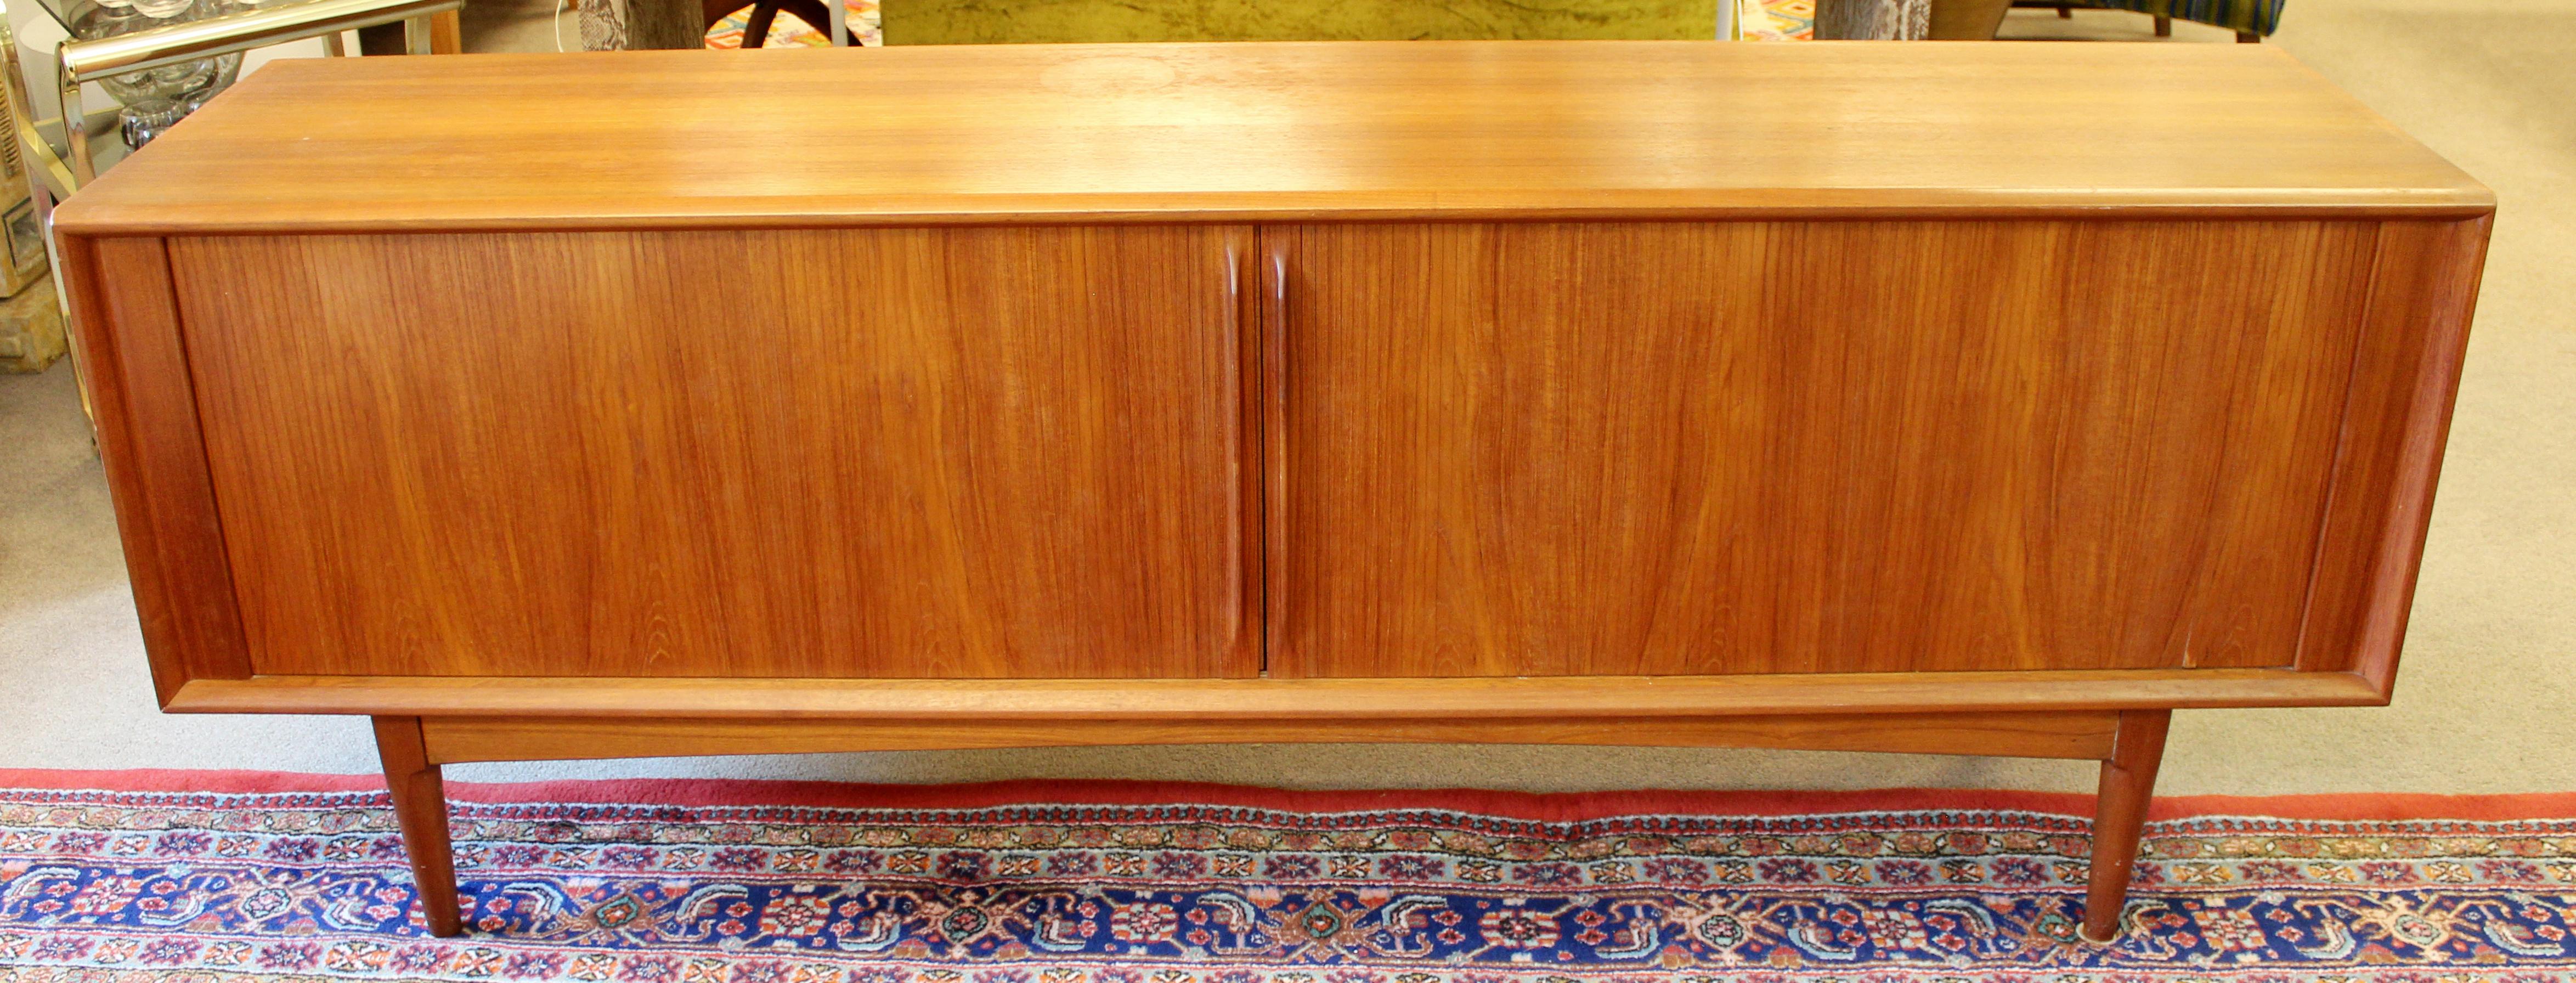 For your consideration is a fantastic, teak credenza, with three drawers, made in Denmark, in the style of Arne Vodder, circa 1960s. In very good vintage condition. The dimensions are 82.5